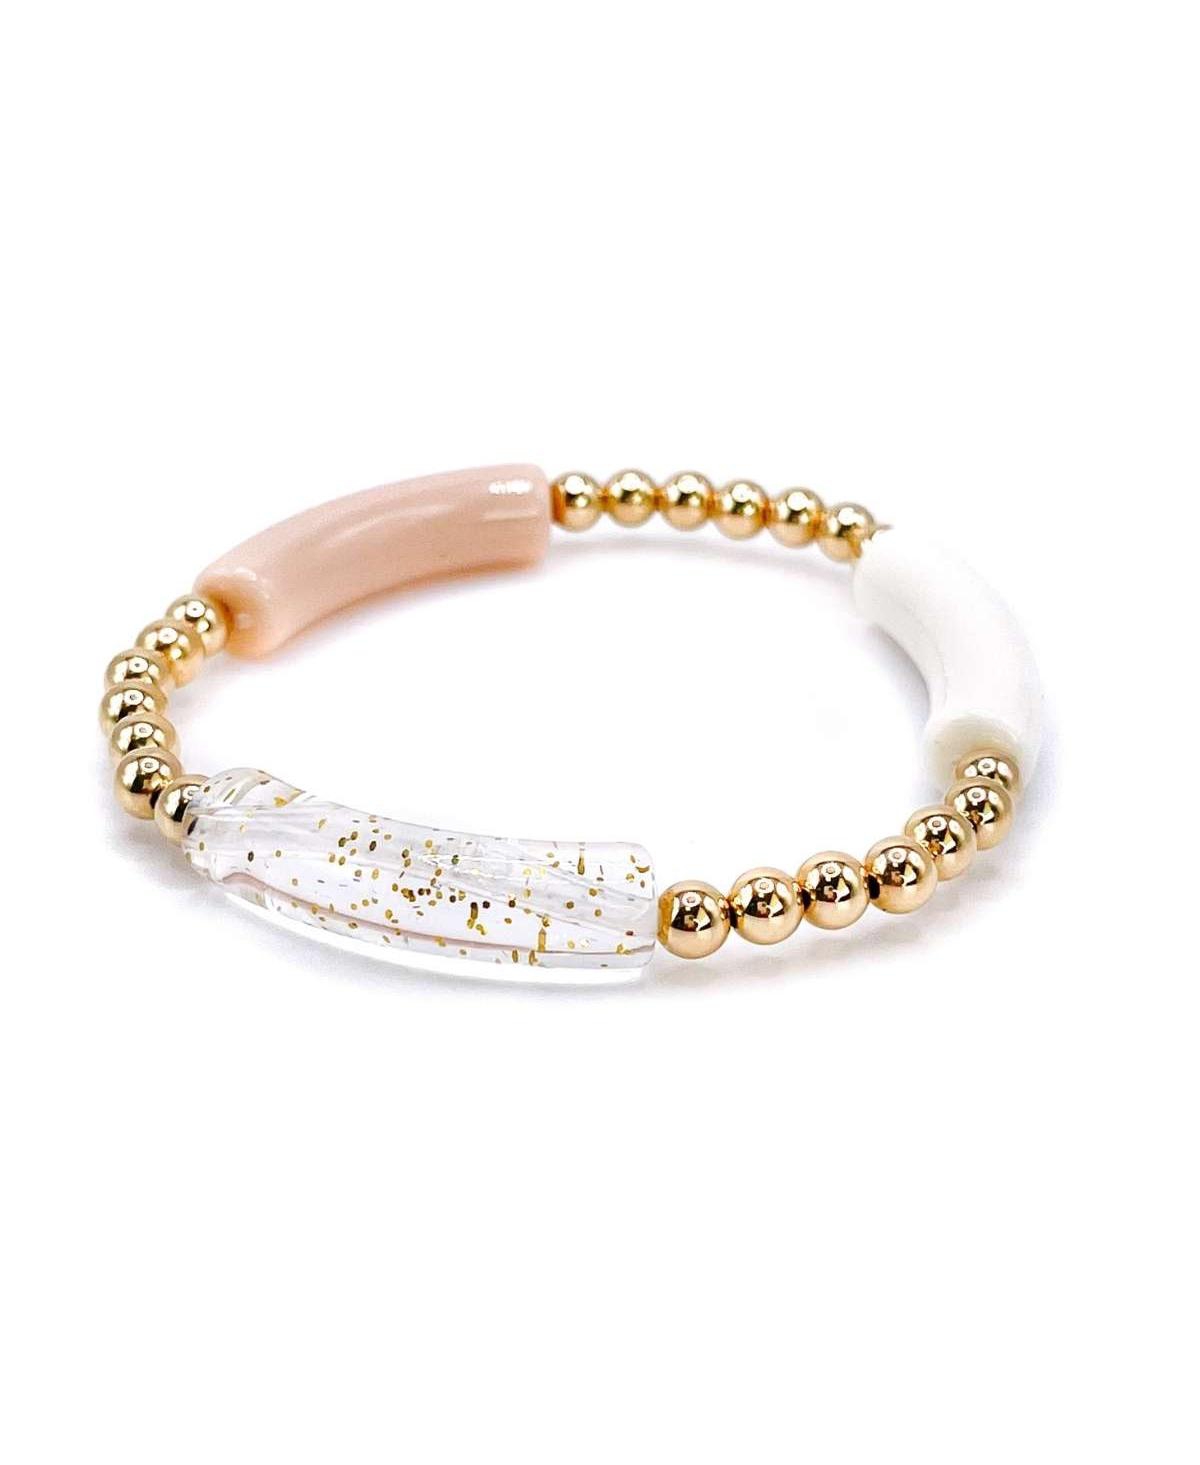 Non-Tarnishing Gold filled, 5mm Gold Ball and Acrylic Stretch Bracelet - Neutral